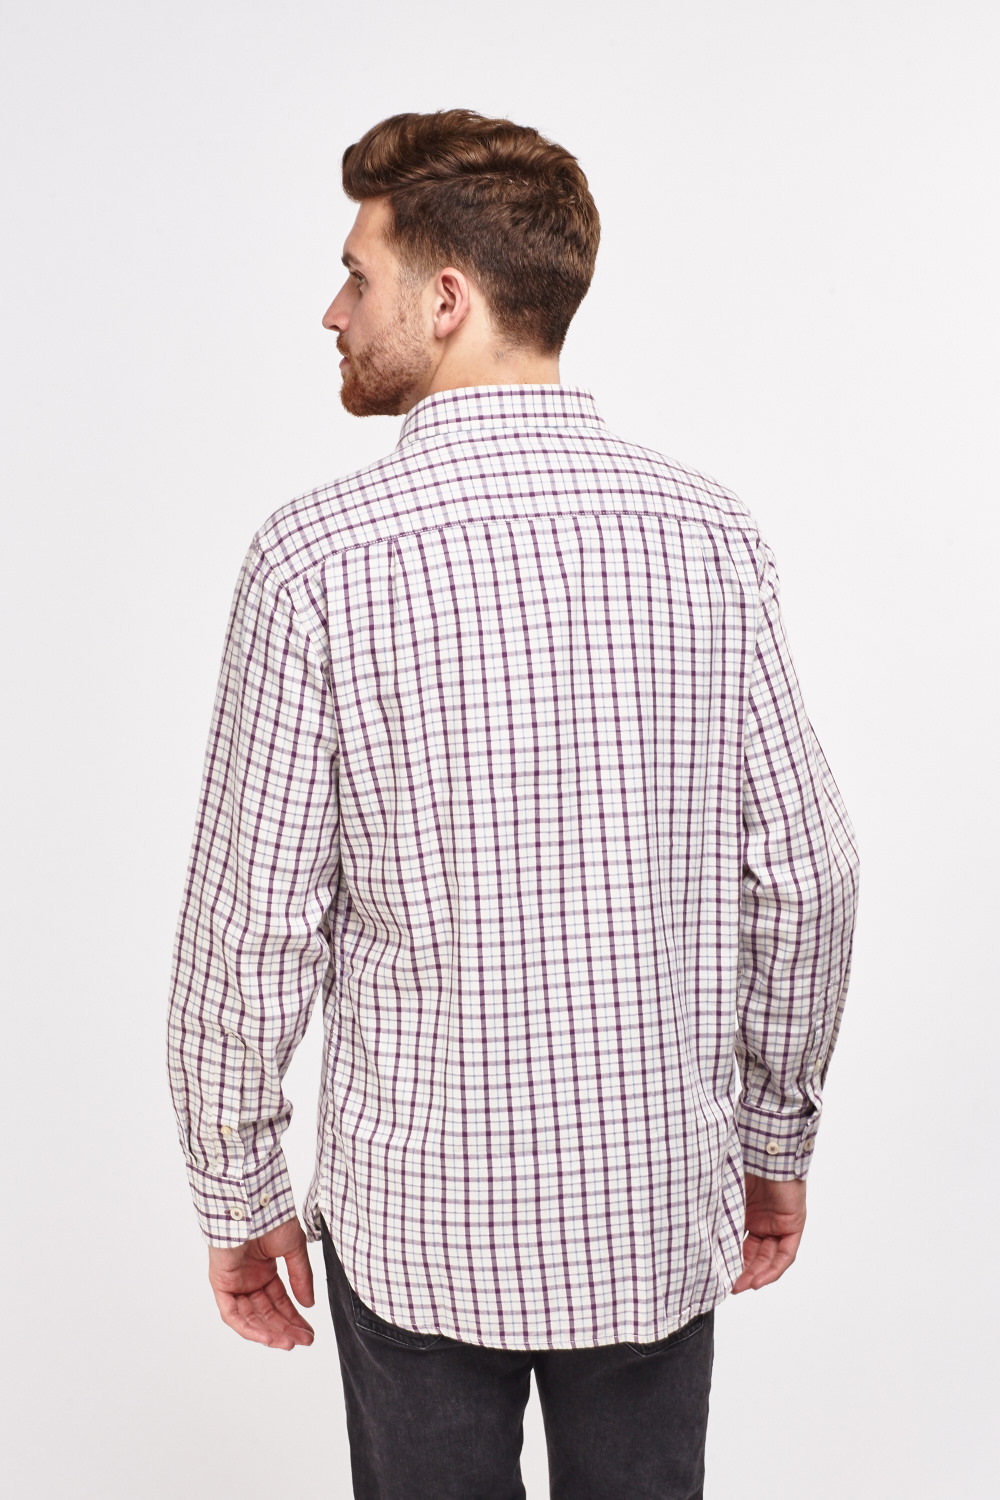 Checked Gingham Shirt - Just $6